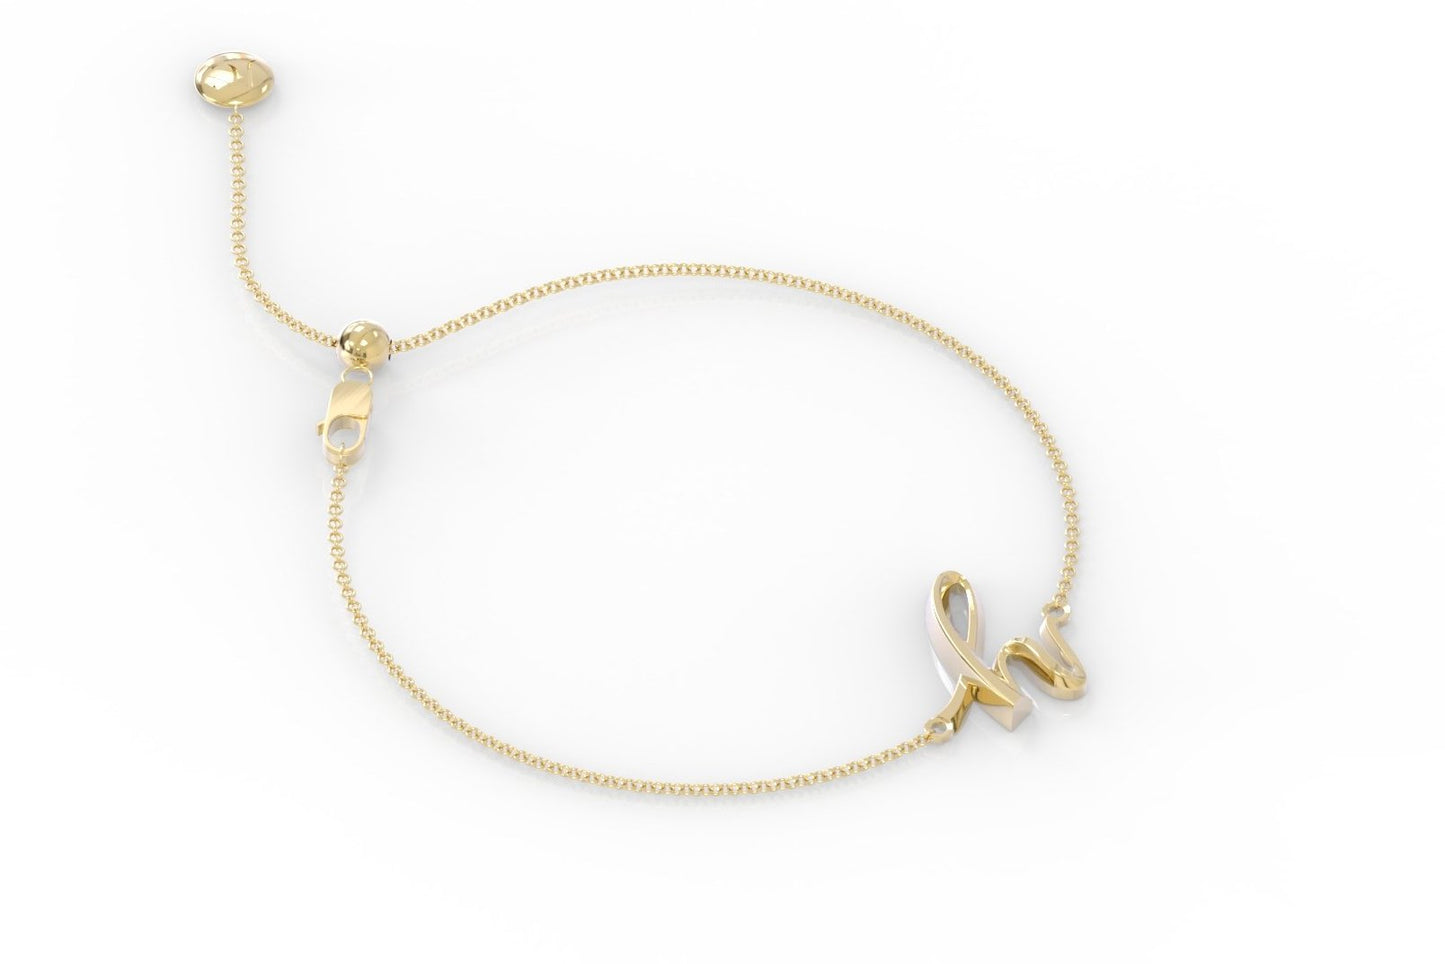 The Love Collect - "H" Bracelet